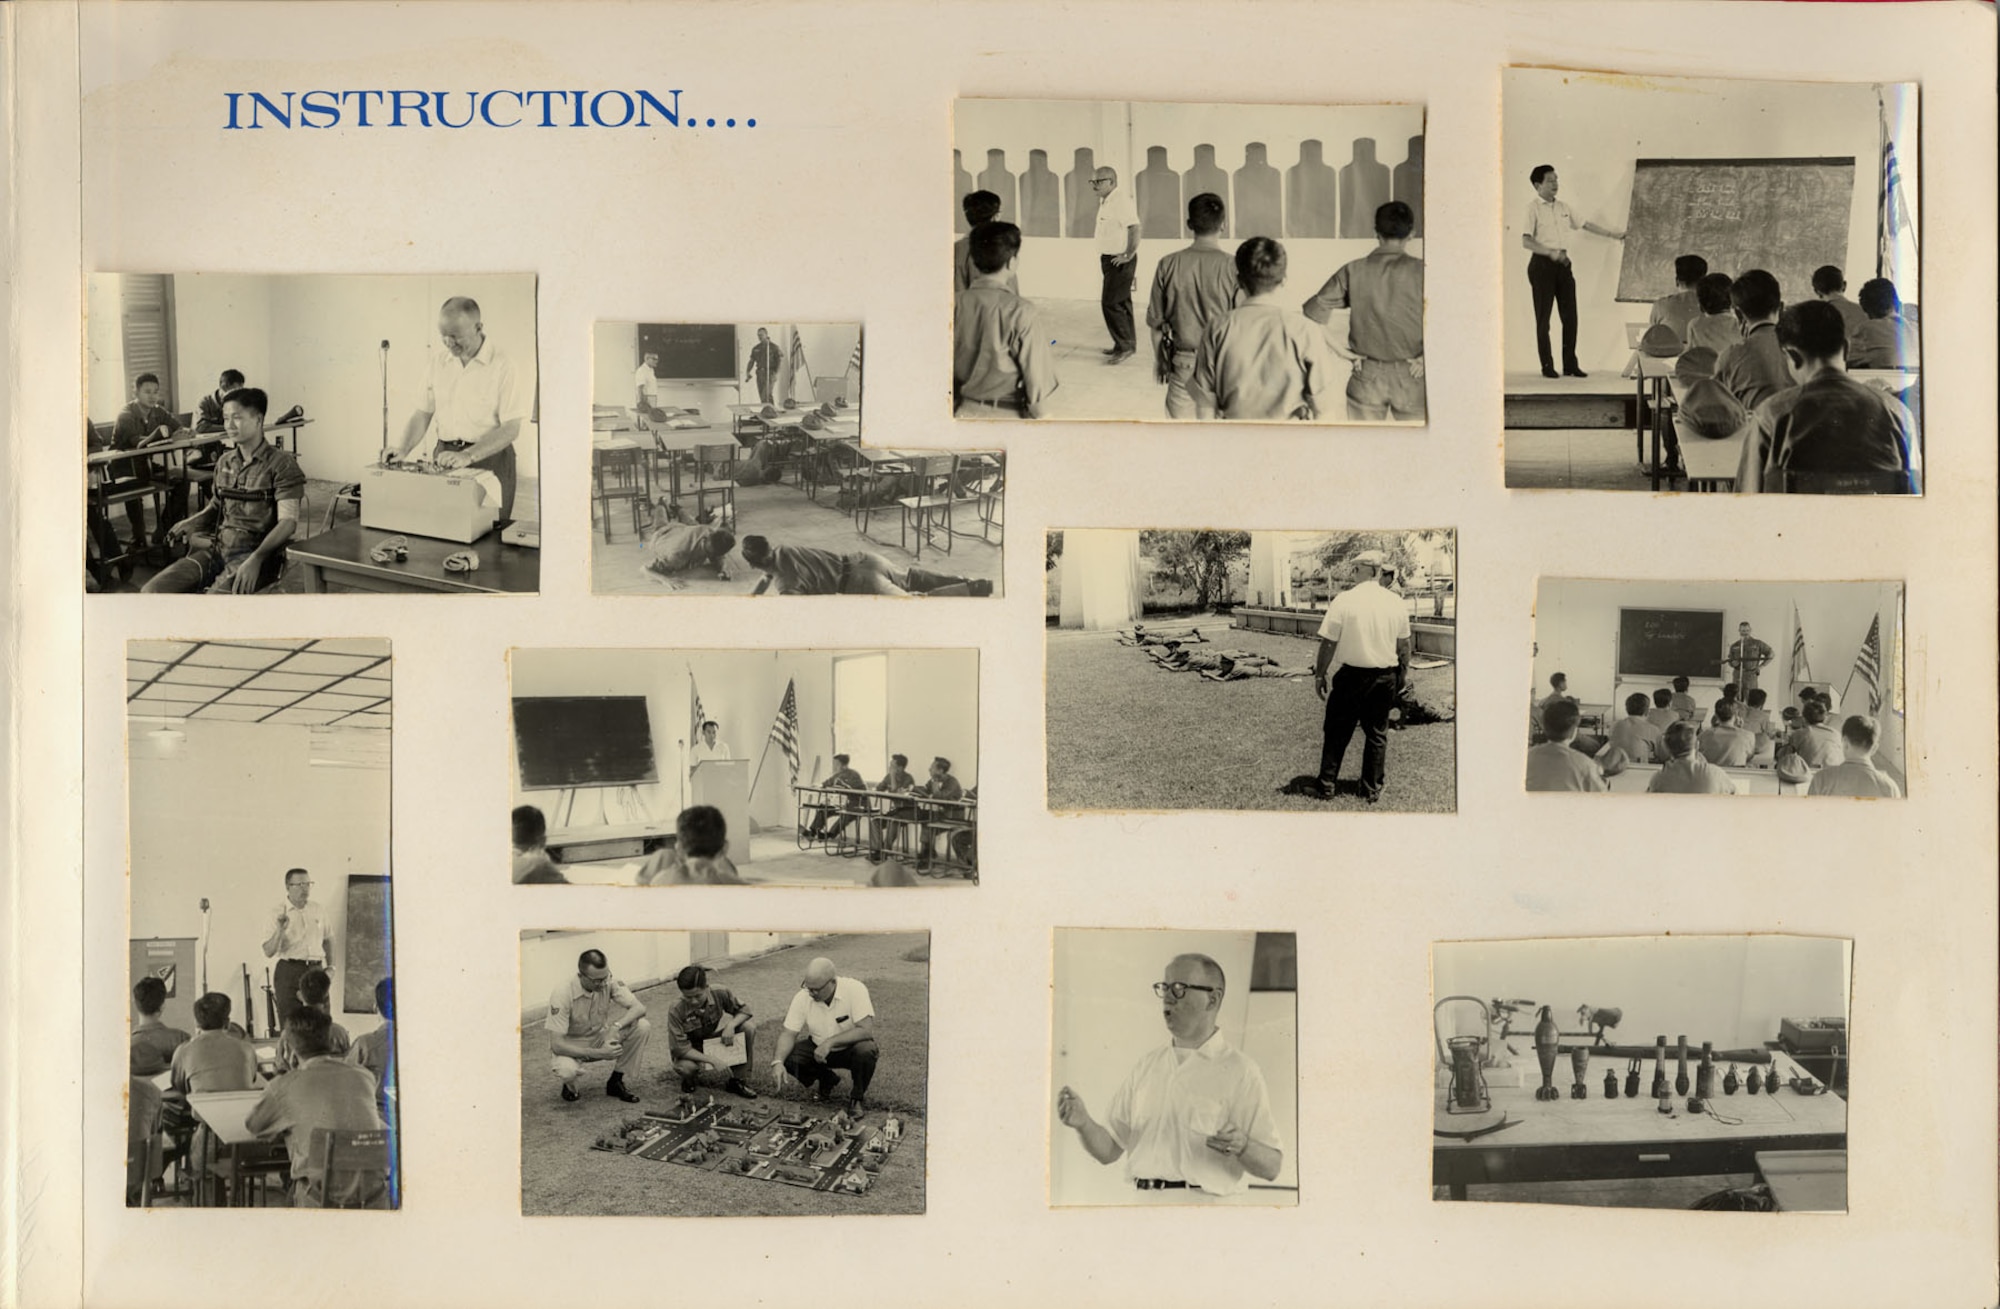 OSI trained Vietnamese criminal investigators in Southeast Asia. This class book from 1965 shows several training activities, including polygraphy and weapons training. (U.S. Air Force photo)